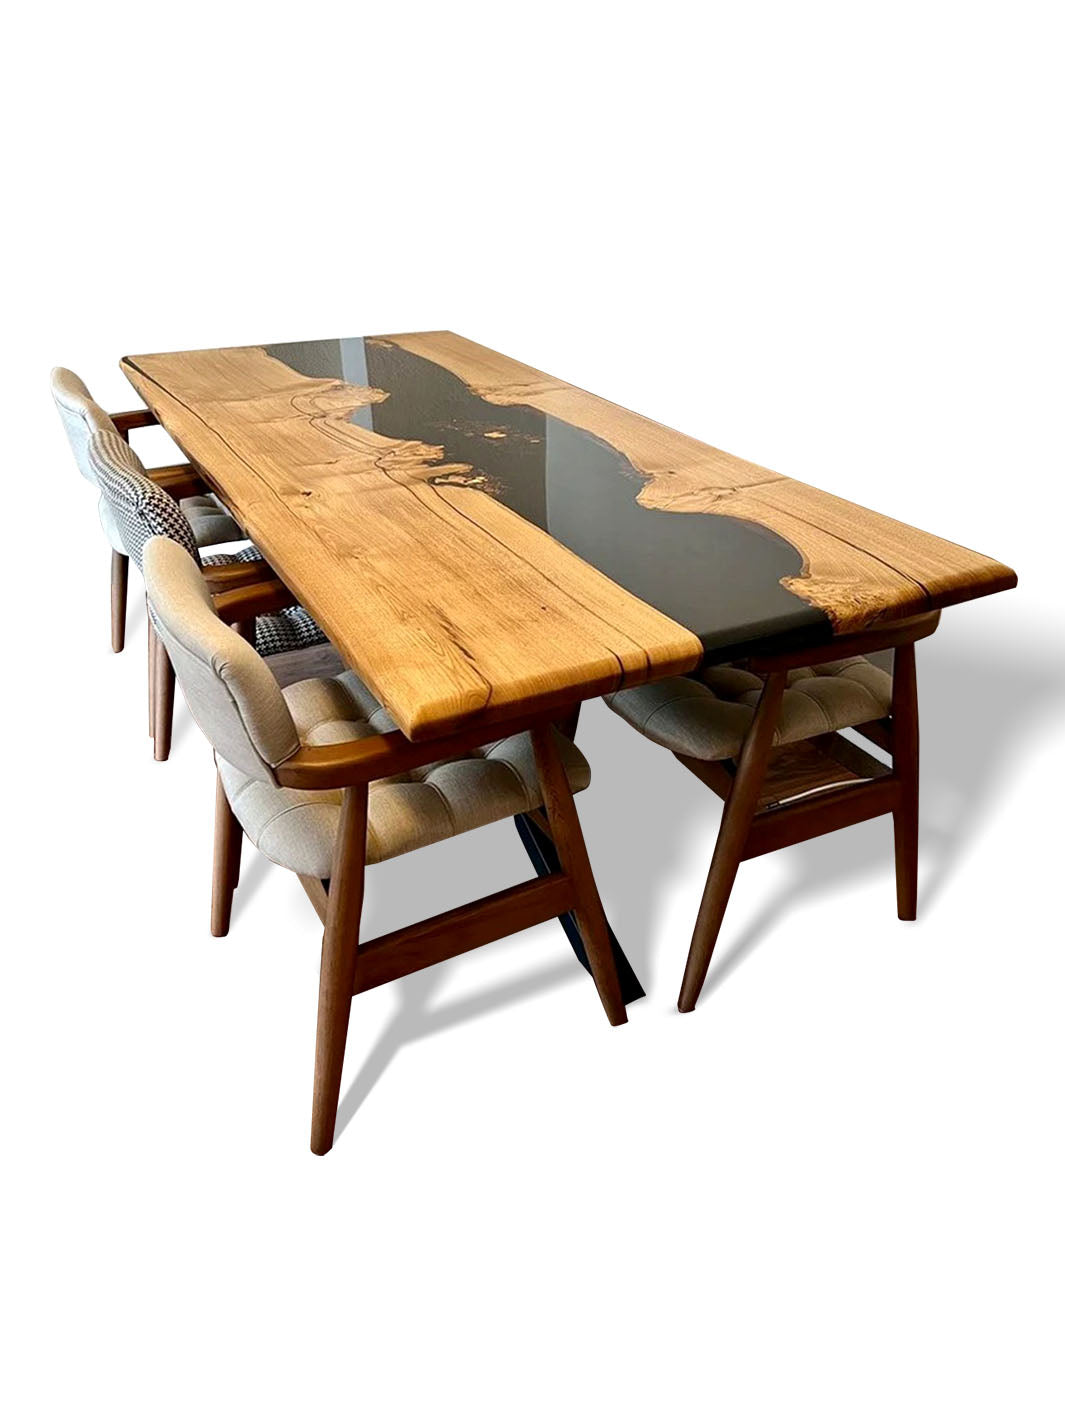 Handcrafted Black River Epoxy Resin Chestnut Dining Table | 80" x 35" Harden Tables HWC-0001